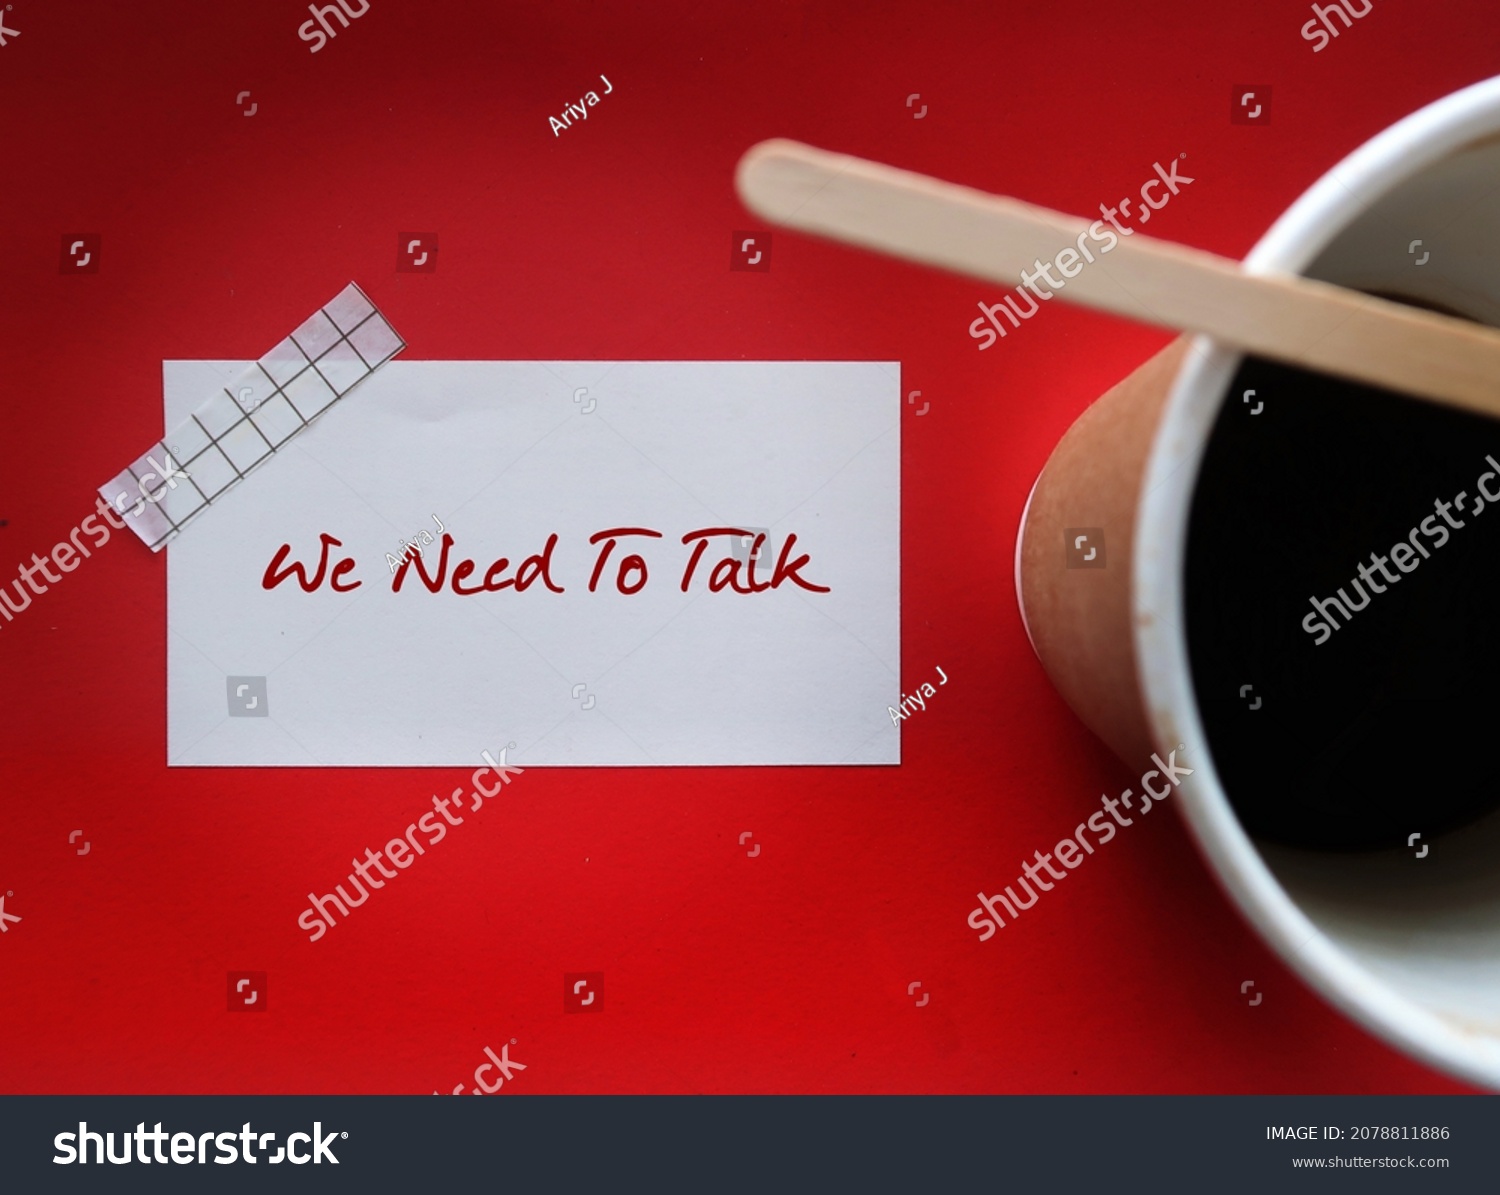 Coffee cup on red background with note written WE NEED TO TALK, means there is a serious problem that needs to be discussed, partners serious conversation generally followed by relationship ending #2078811886